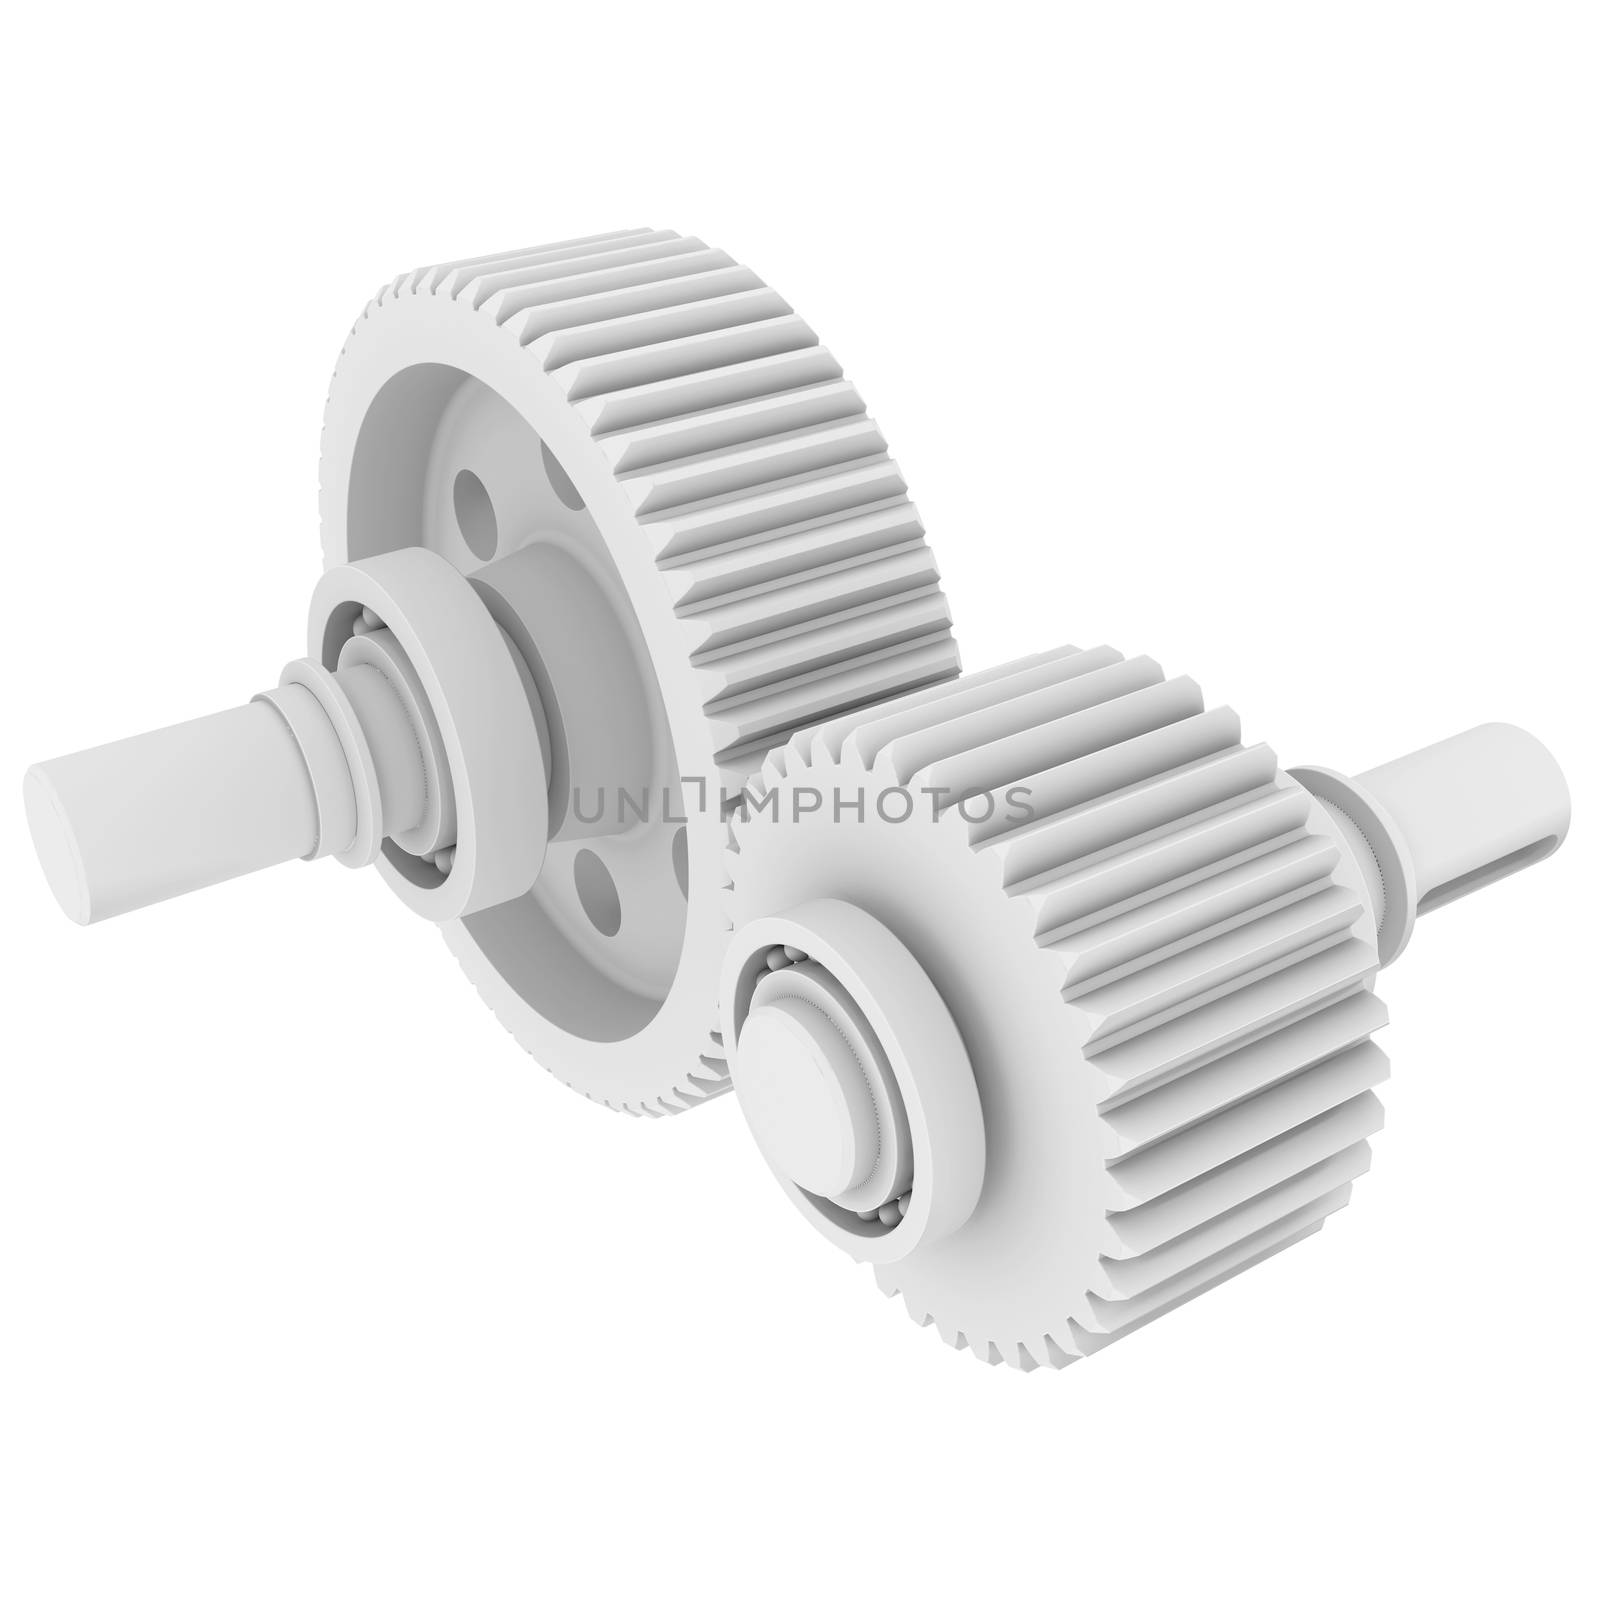 White shafts, gears and bearings. 3d render isolated on white background